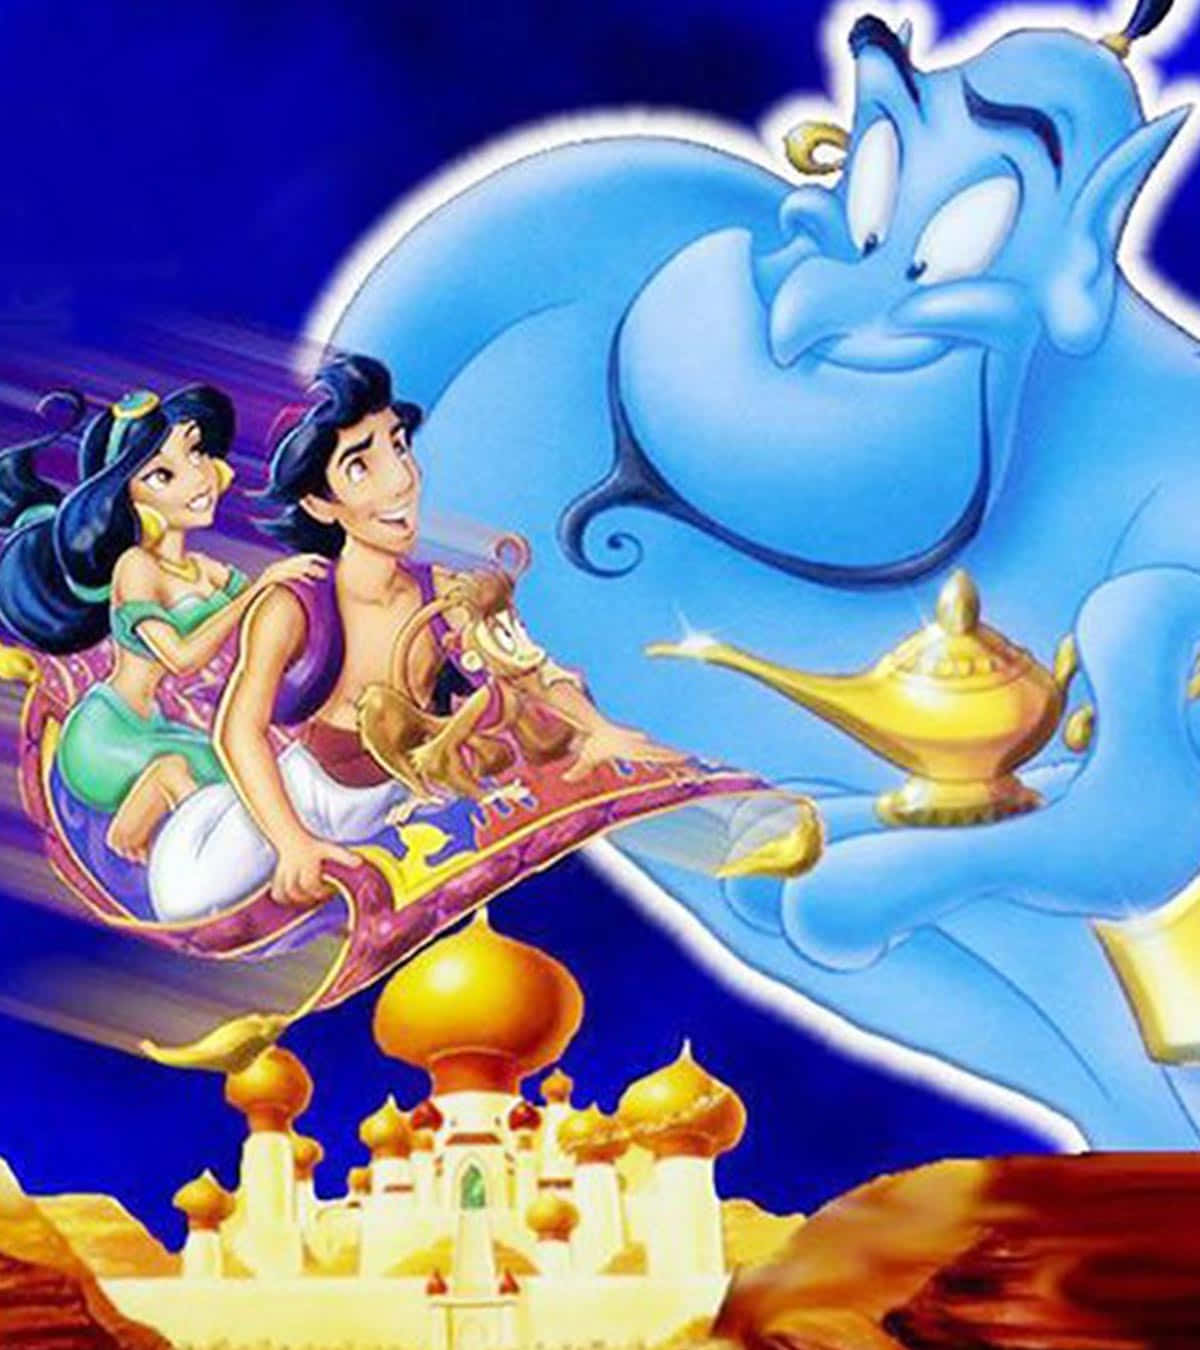 Aladdin flying over Agrabah on his Magic Carpet